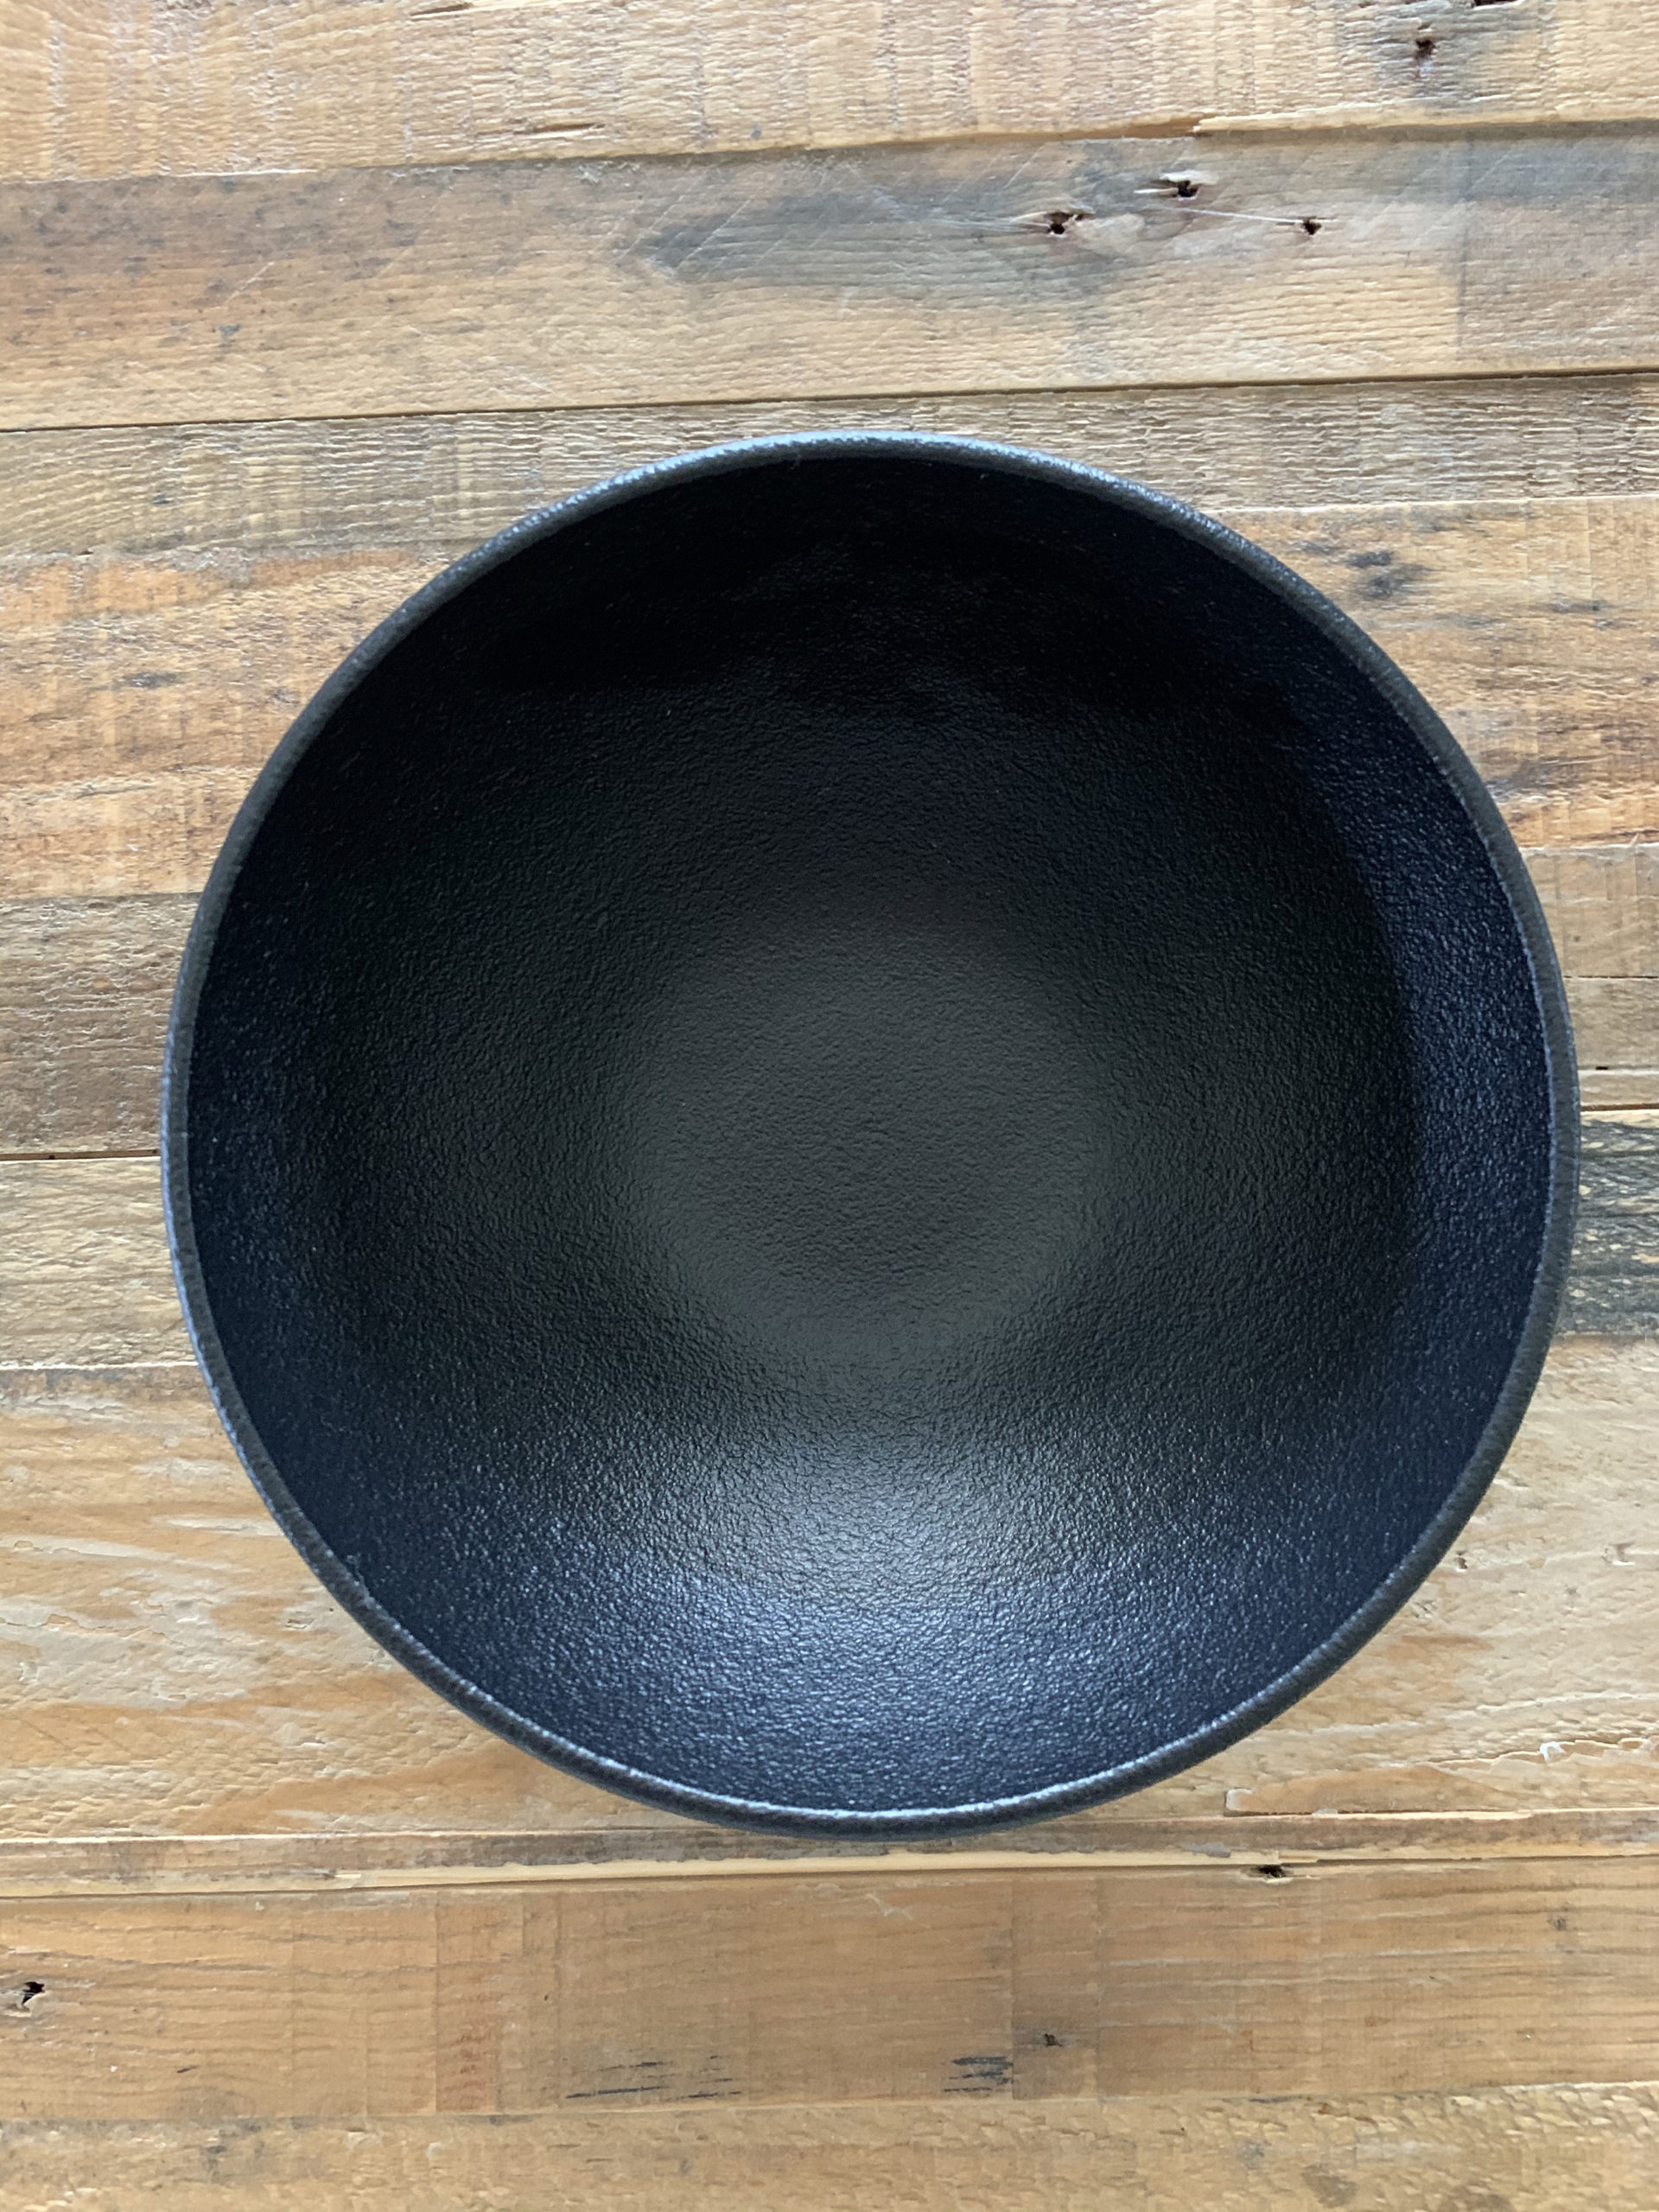 black bowl prop for food photography